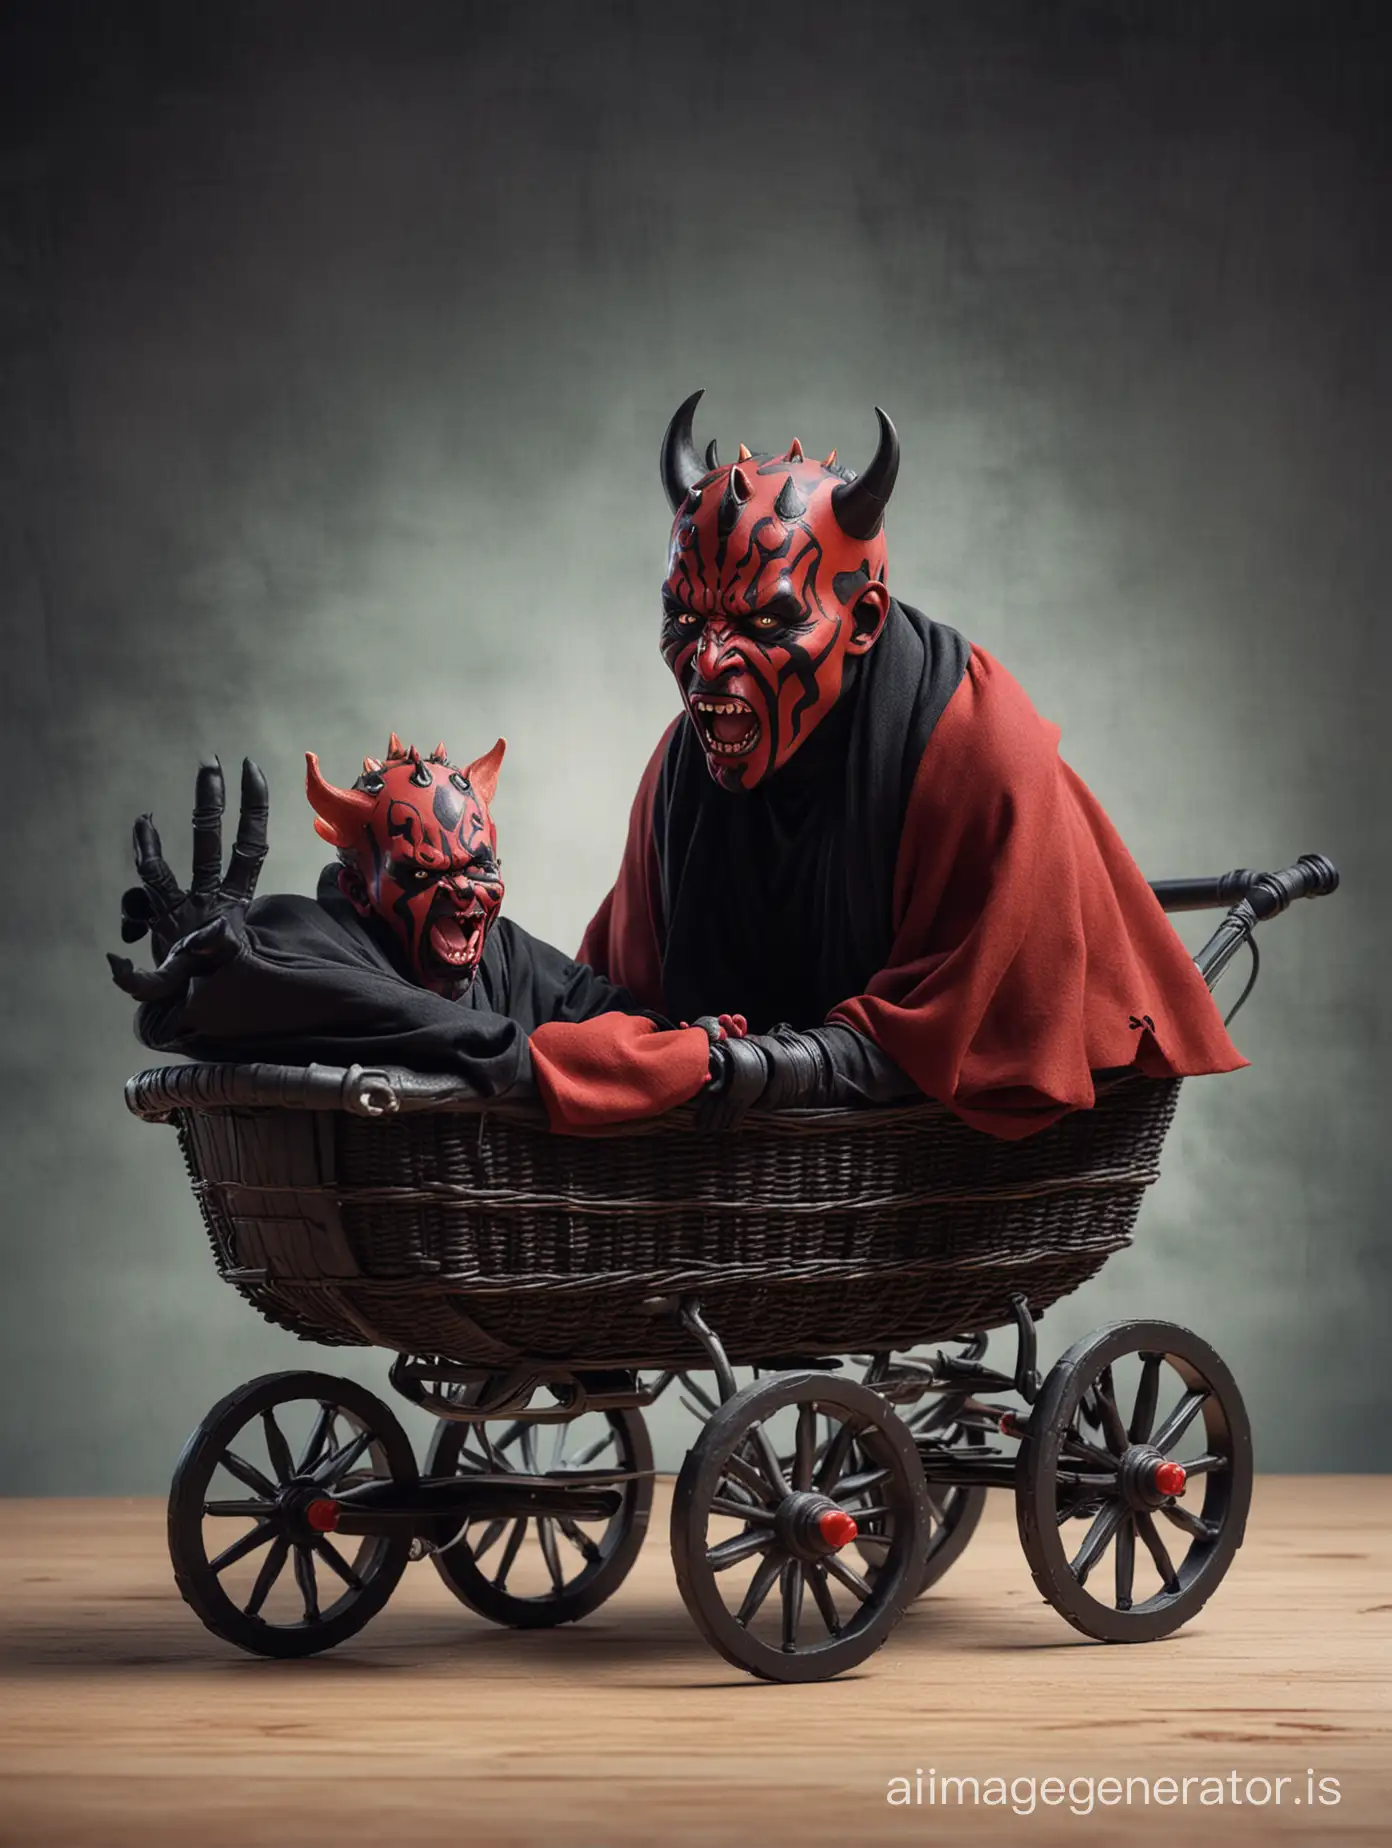 Darth Maul screaming at a baby in a baby carriage. StarWars theme background